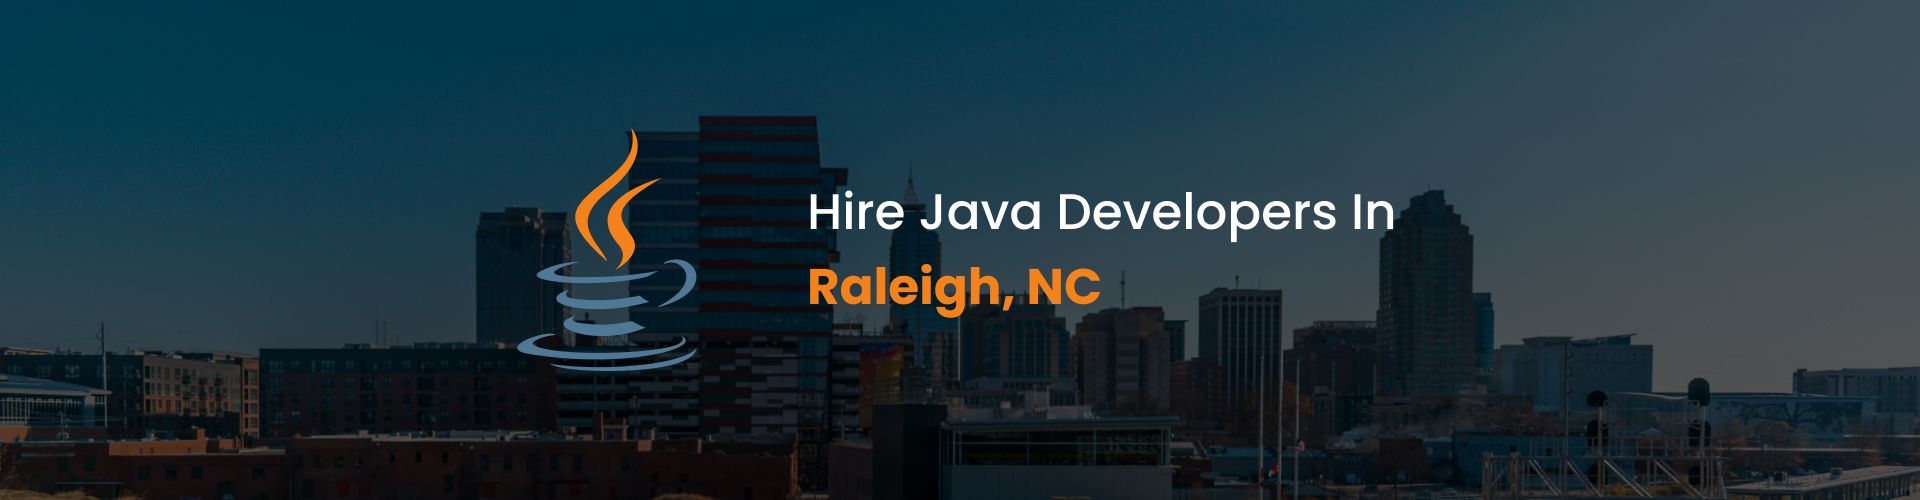 hire java developers in raleigh